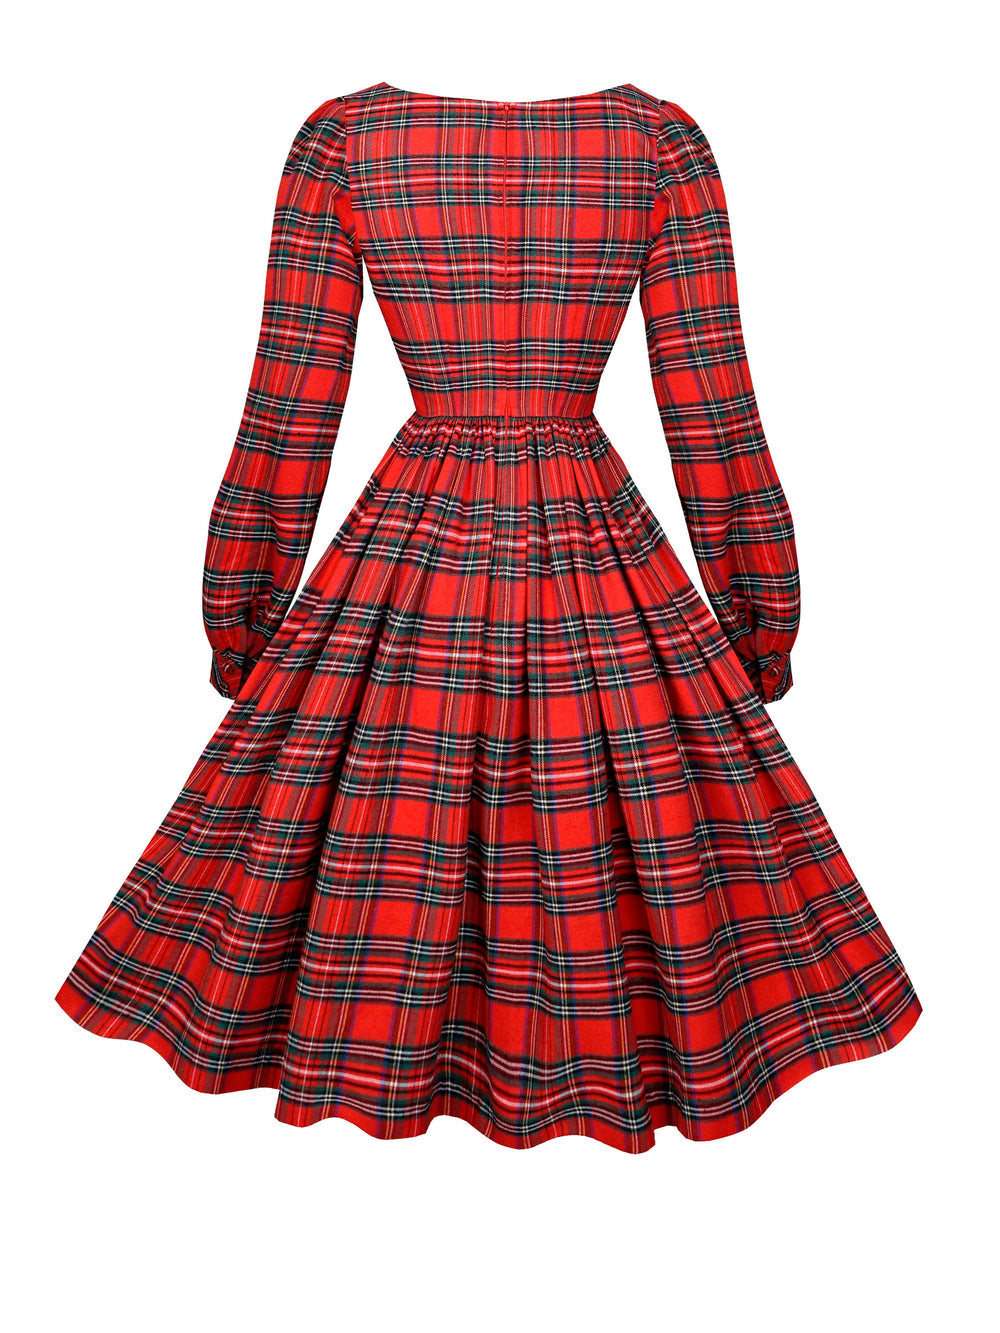 MTO - Harlow Dress in "Christmas Gone Plaid"